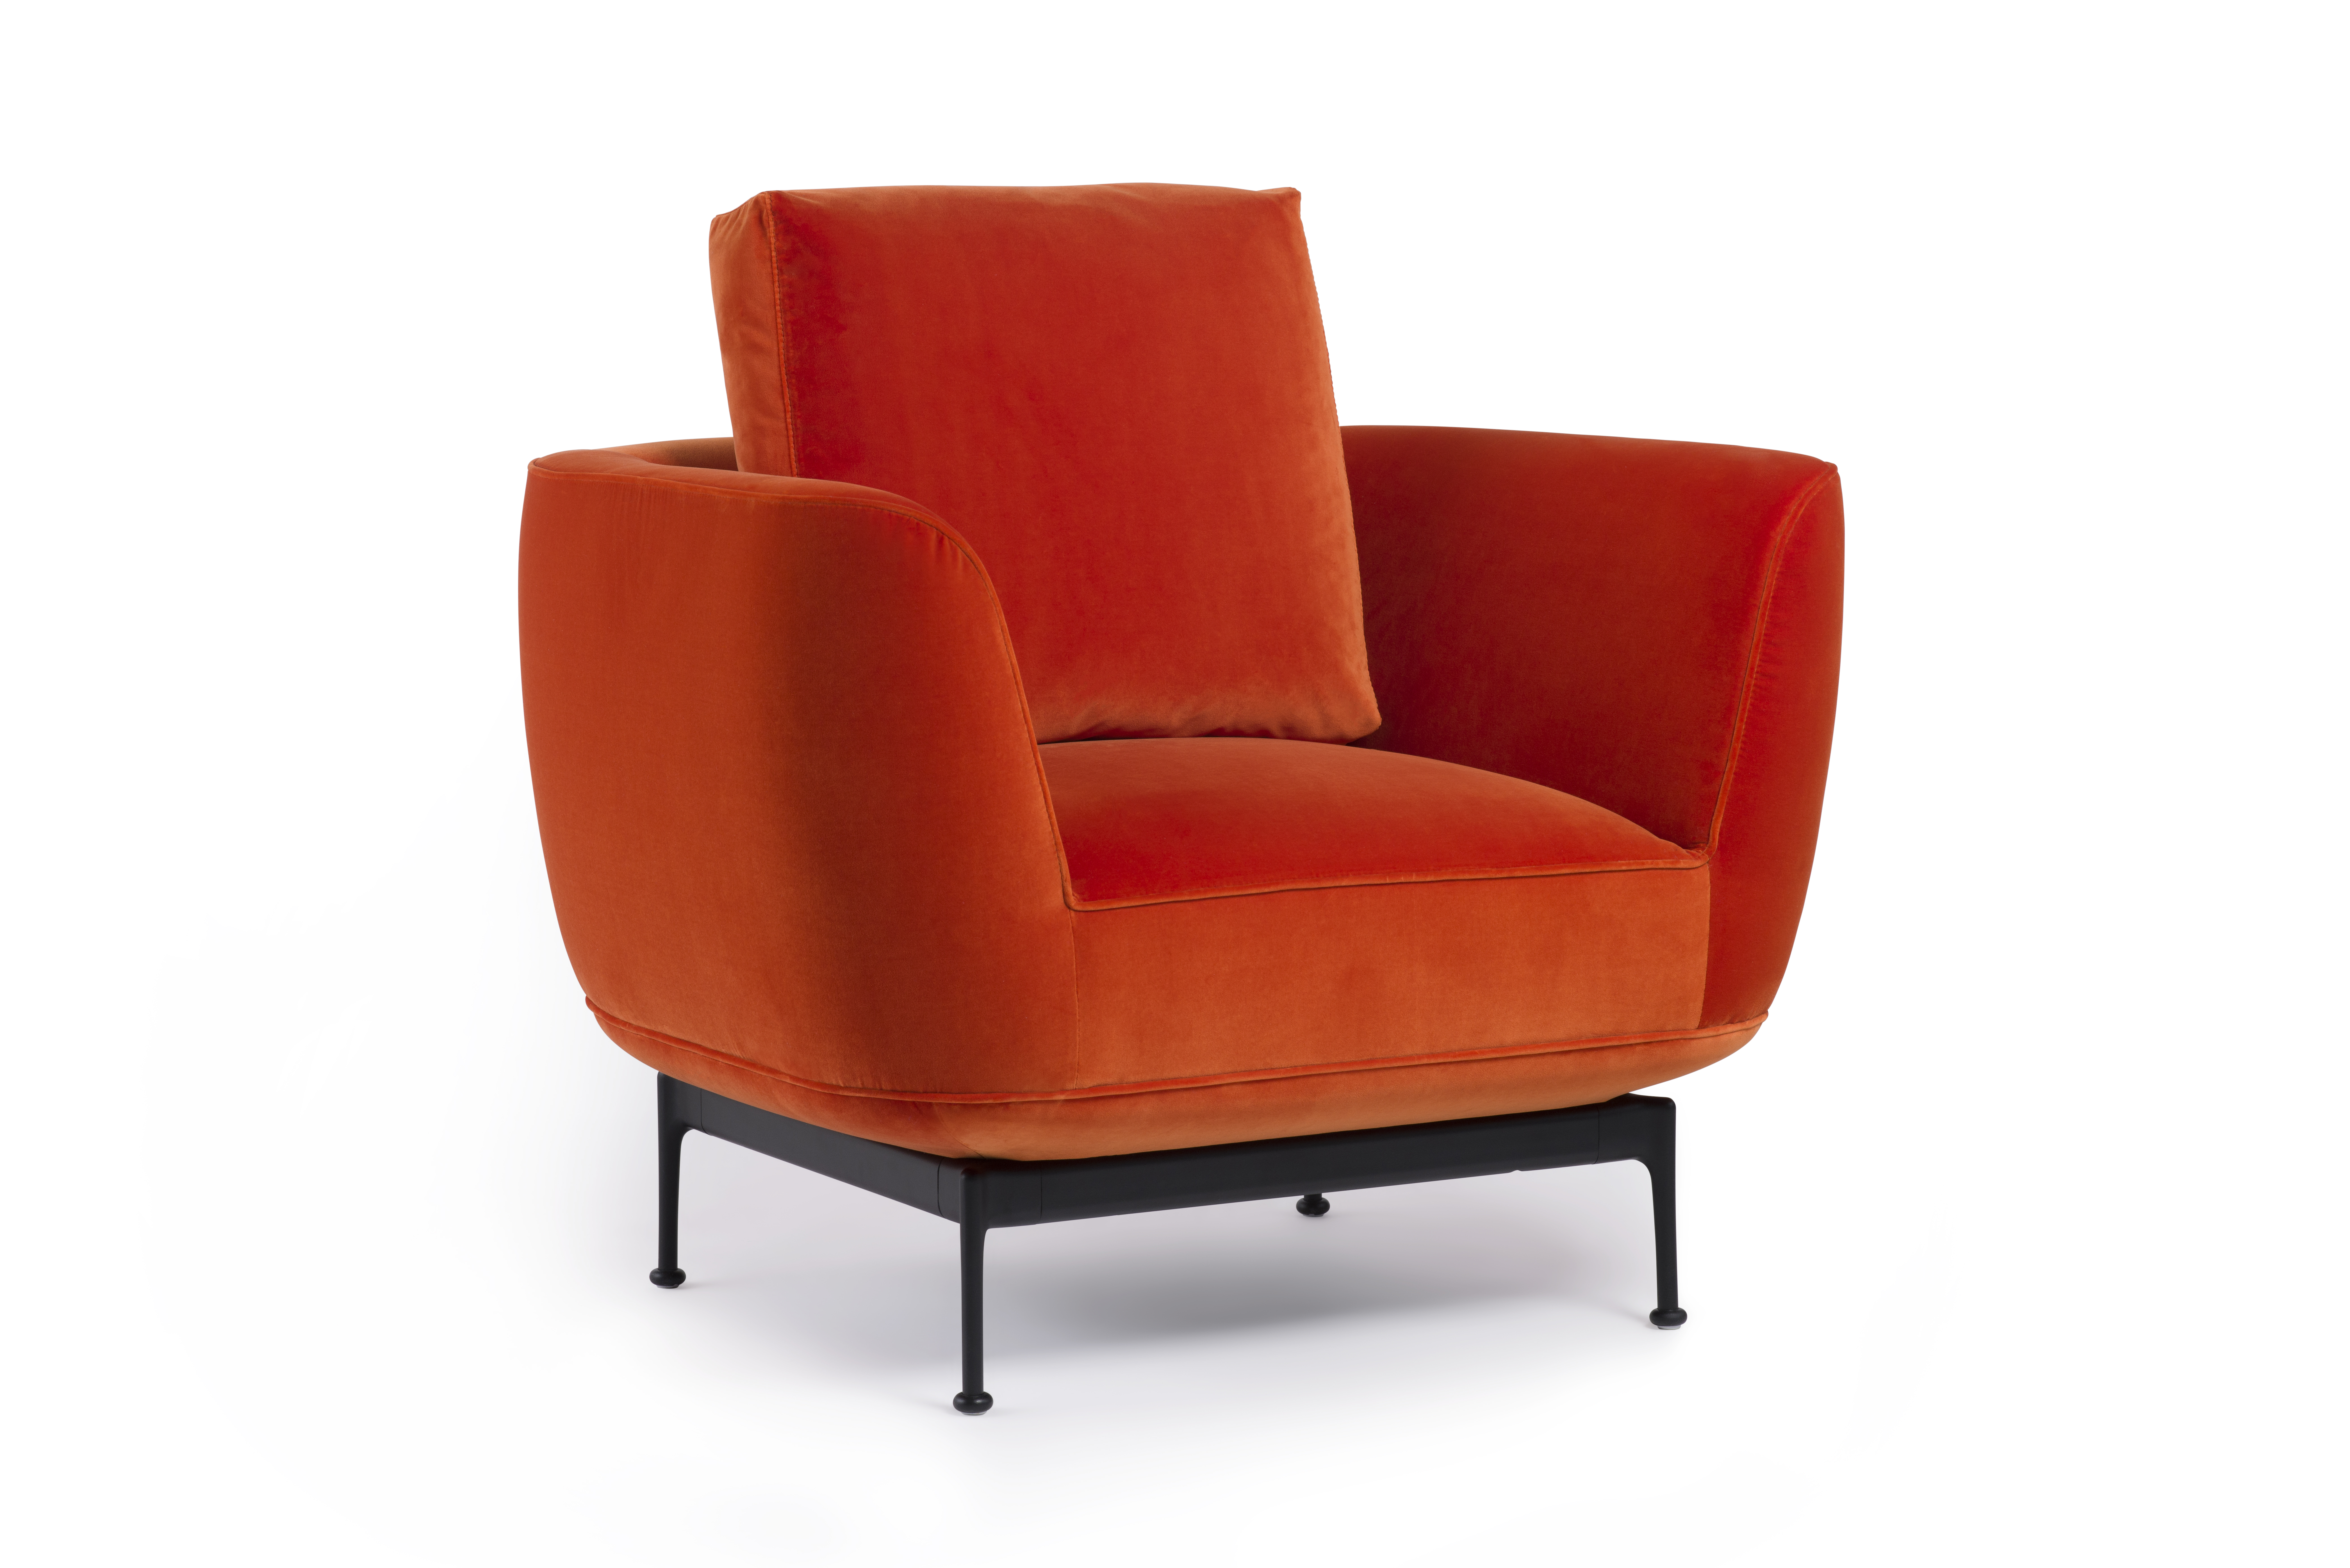 oranger Polstersessel, Fauteuil, Luca Nichetto, Andes Sessel